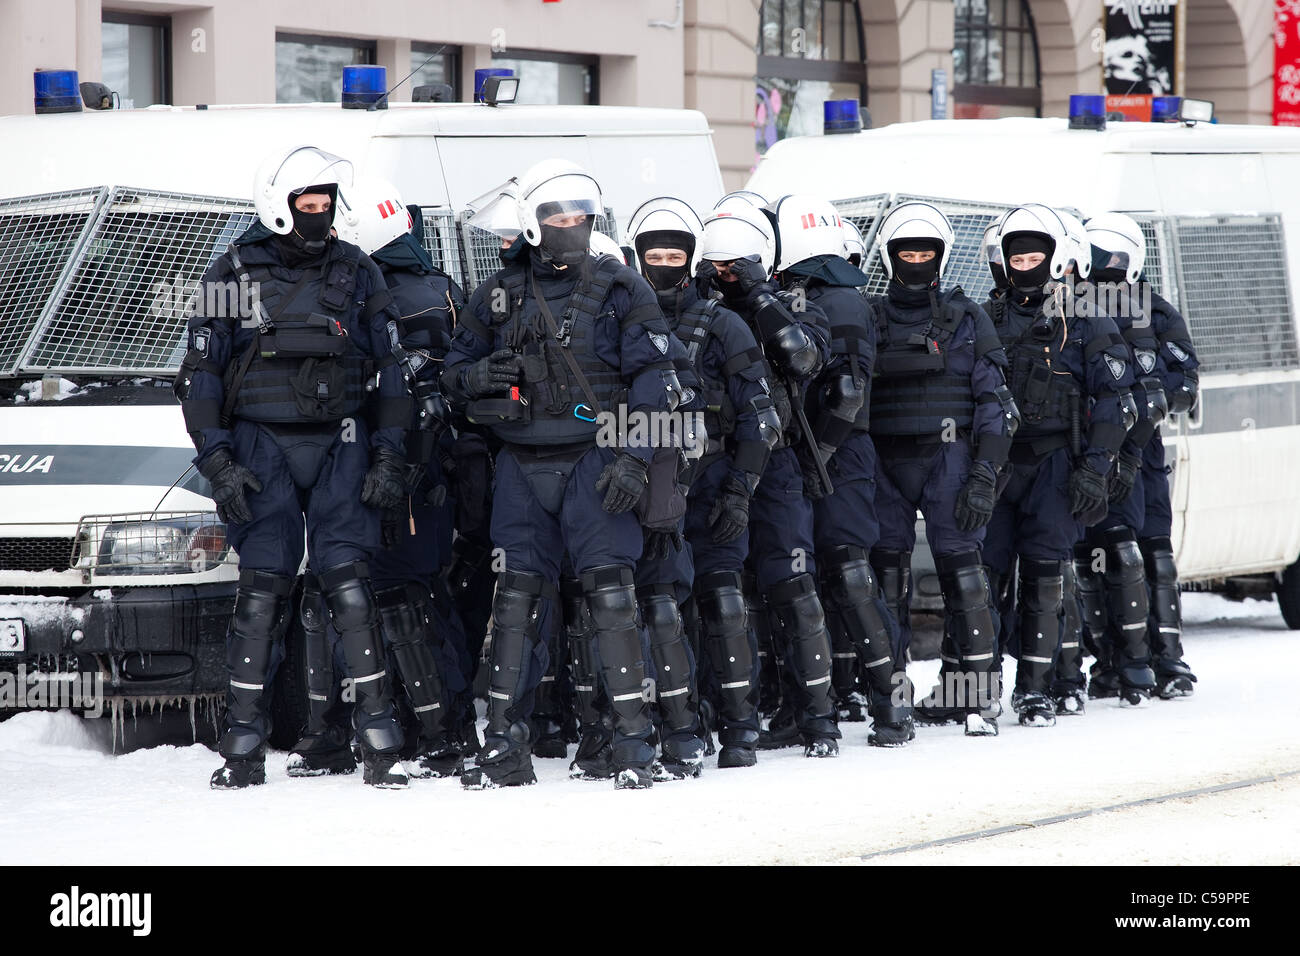 Riot police officers ready to prevent provocations at Commemoration of the Latvian Waffen SS unit or Legionnaires. Stock Photo